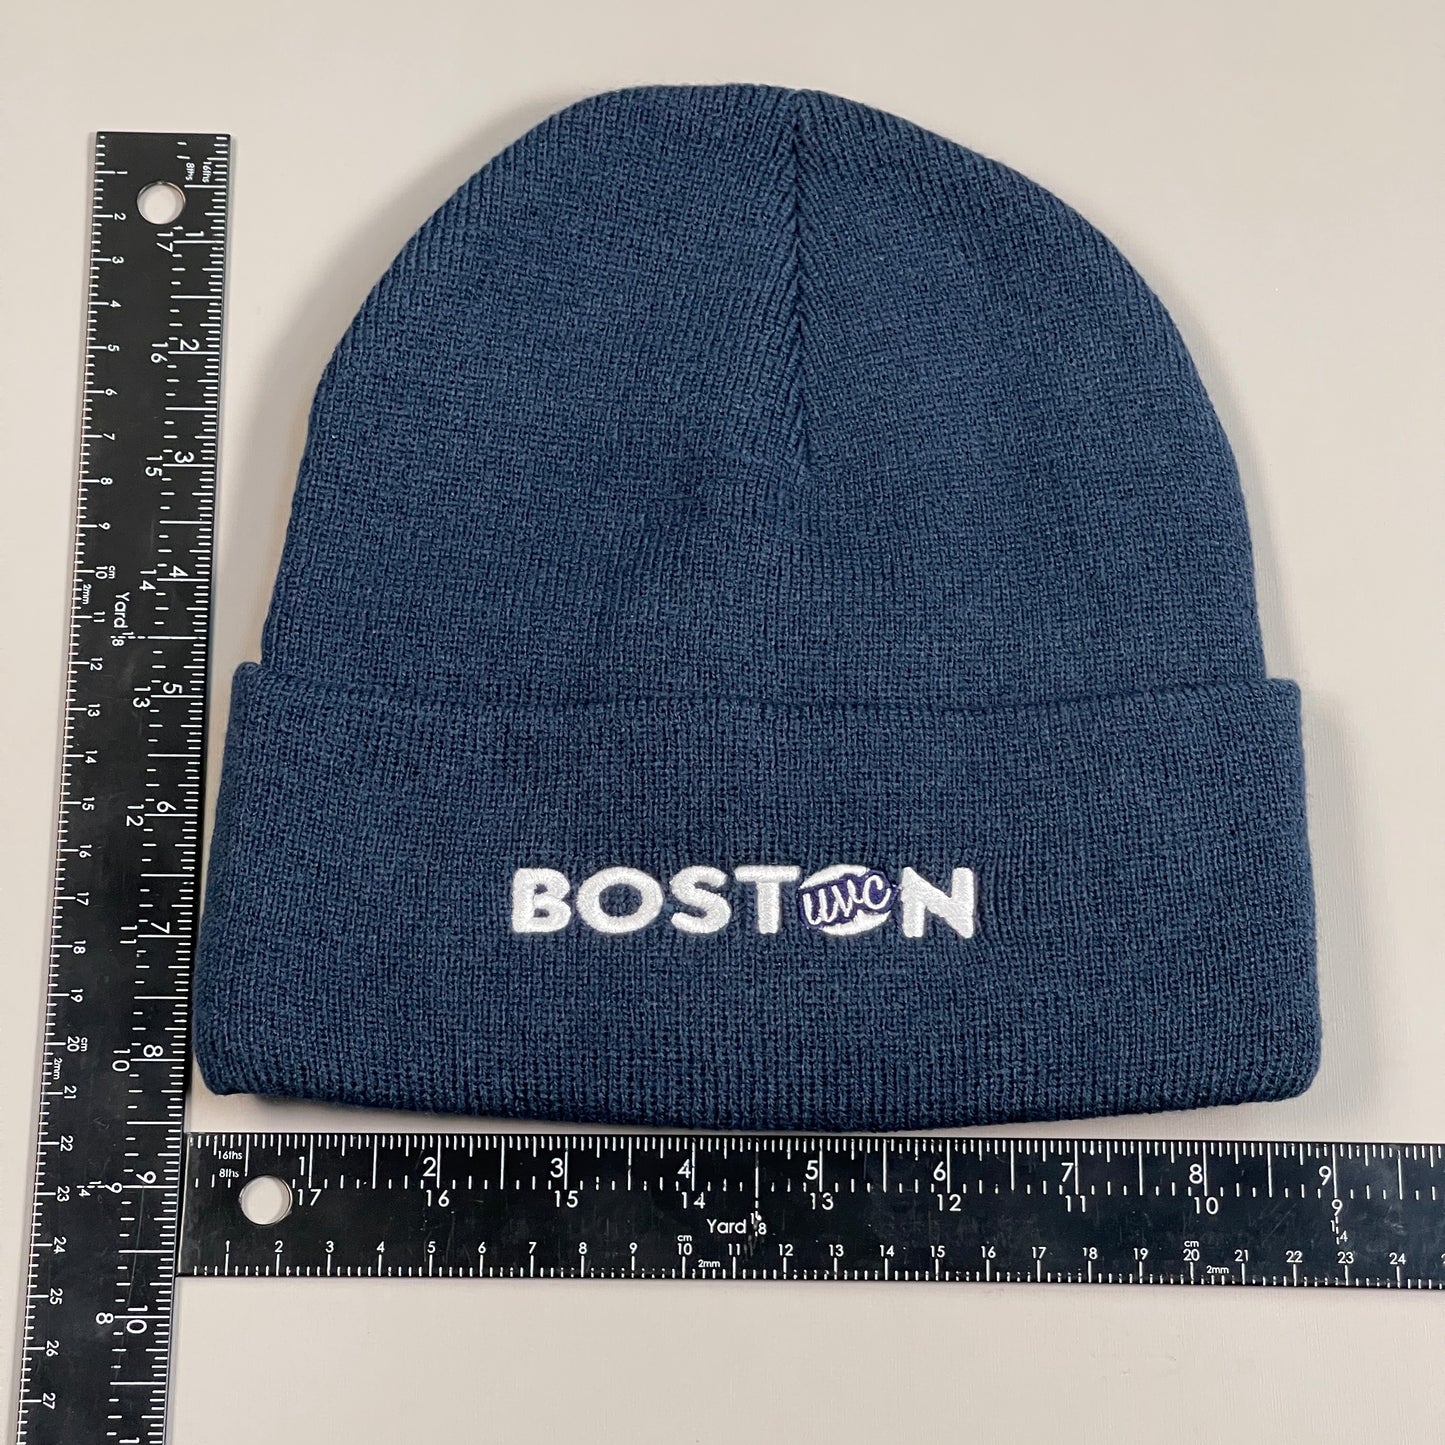 BOSTON UVC Knit Cuff Beanie Embroidered Hat by PORT AUTHORITY Blue (New)